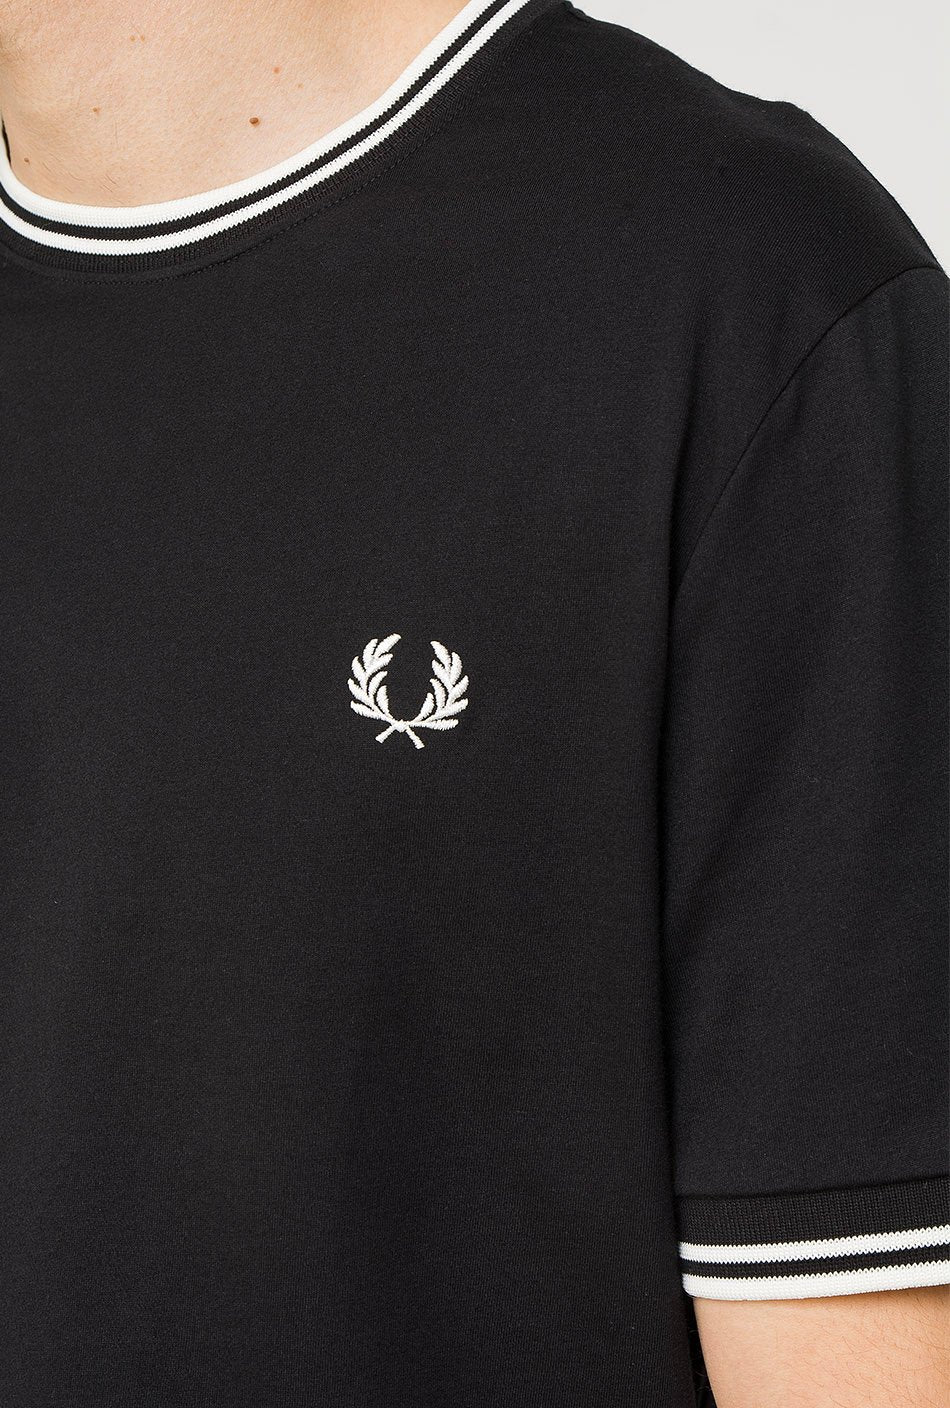 T-shirt Fred Perry Noir